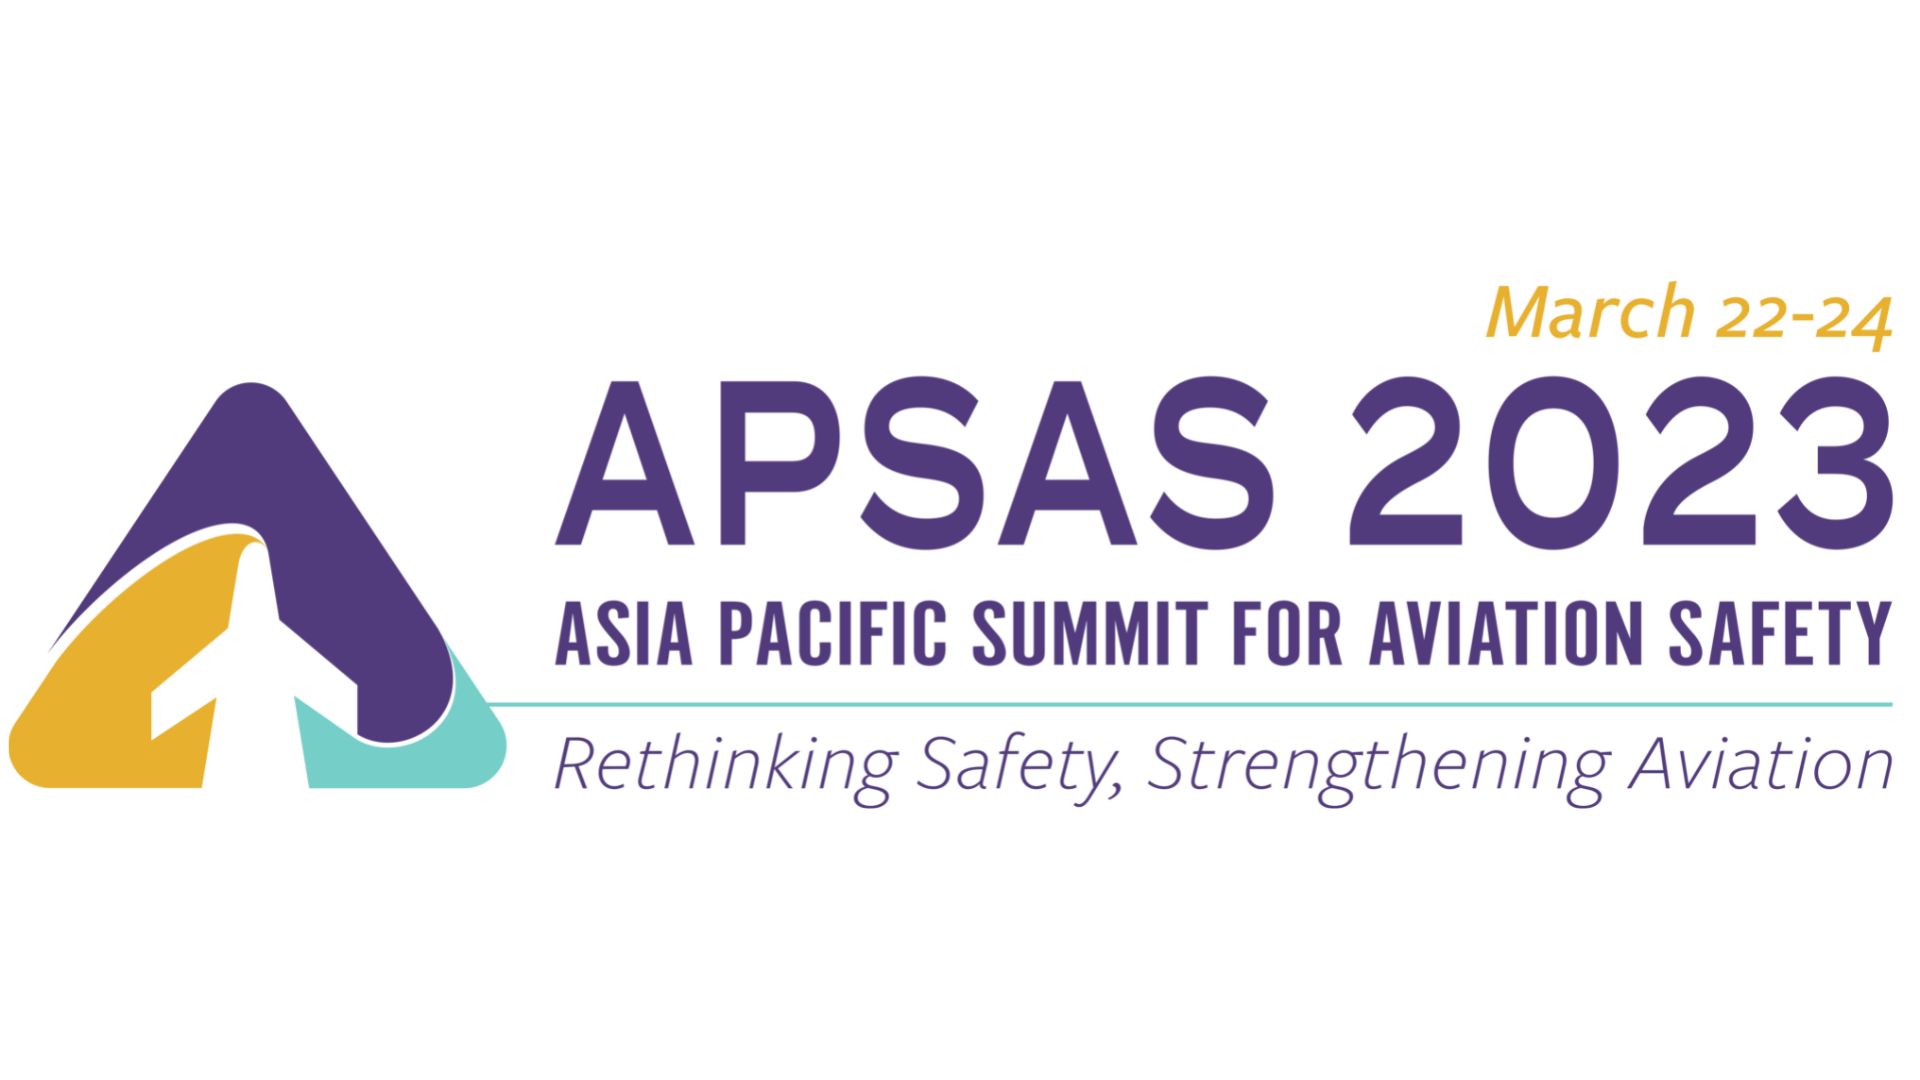 Asia Pacific Summit for Aviation Safety